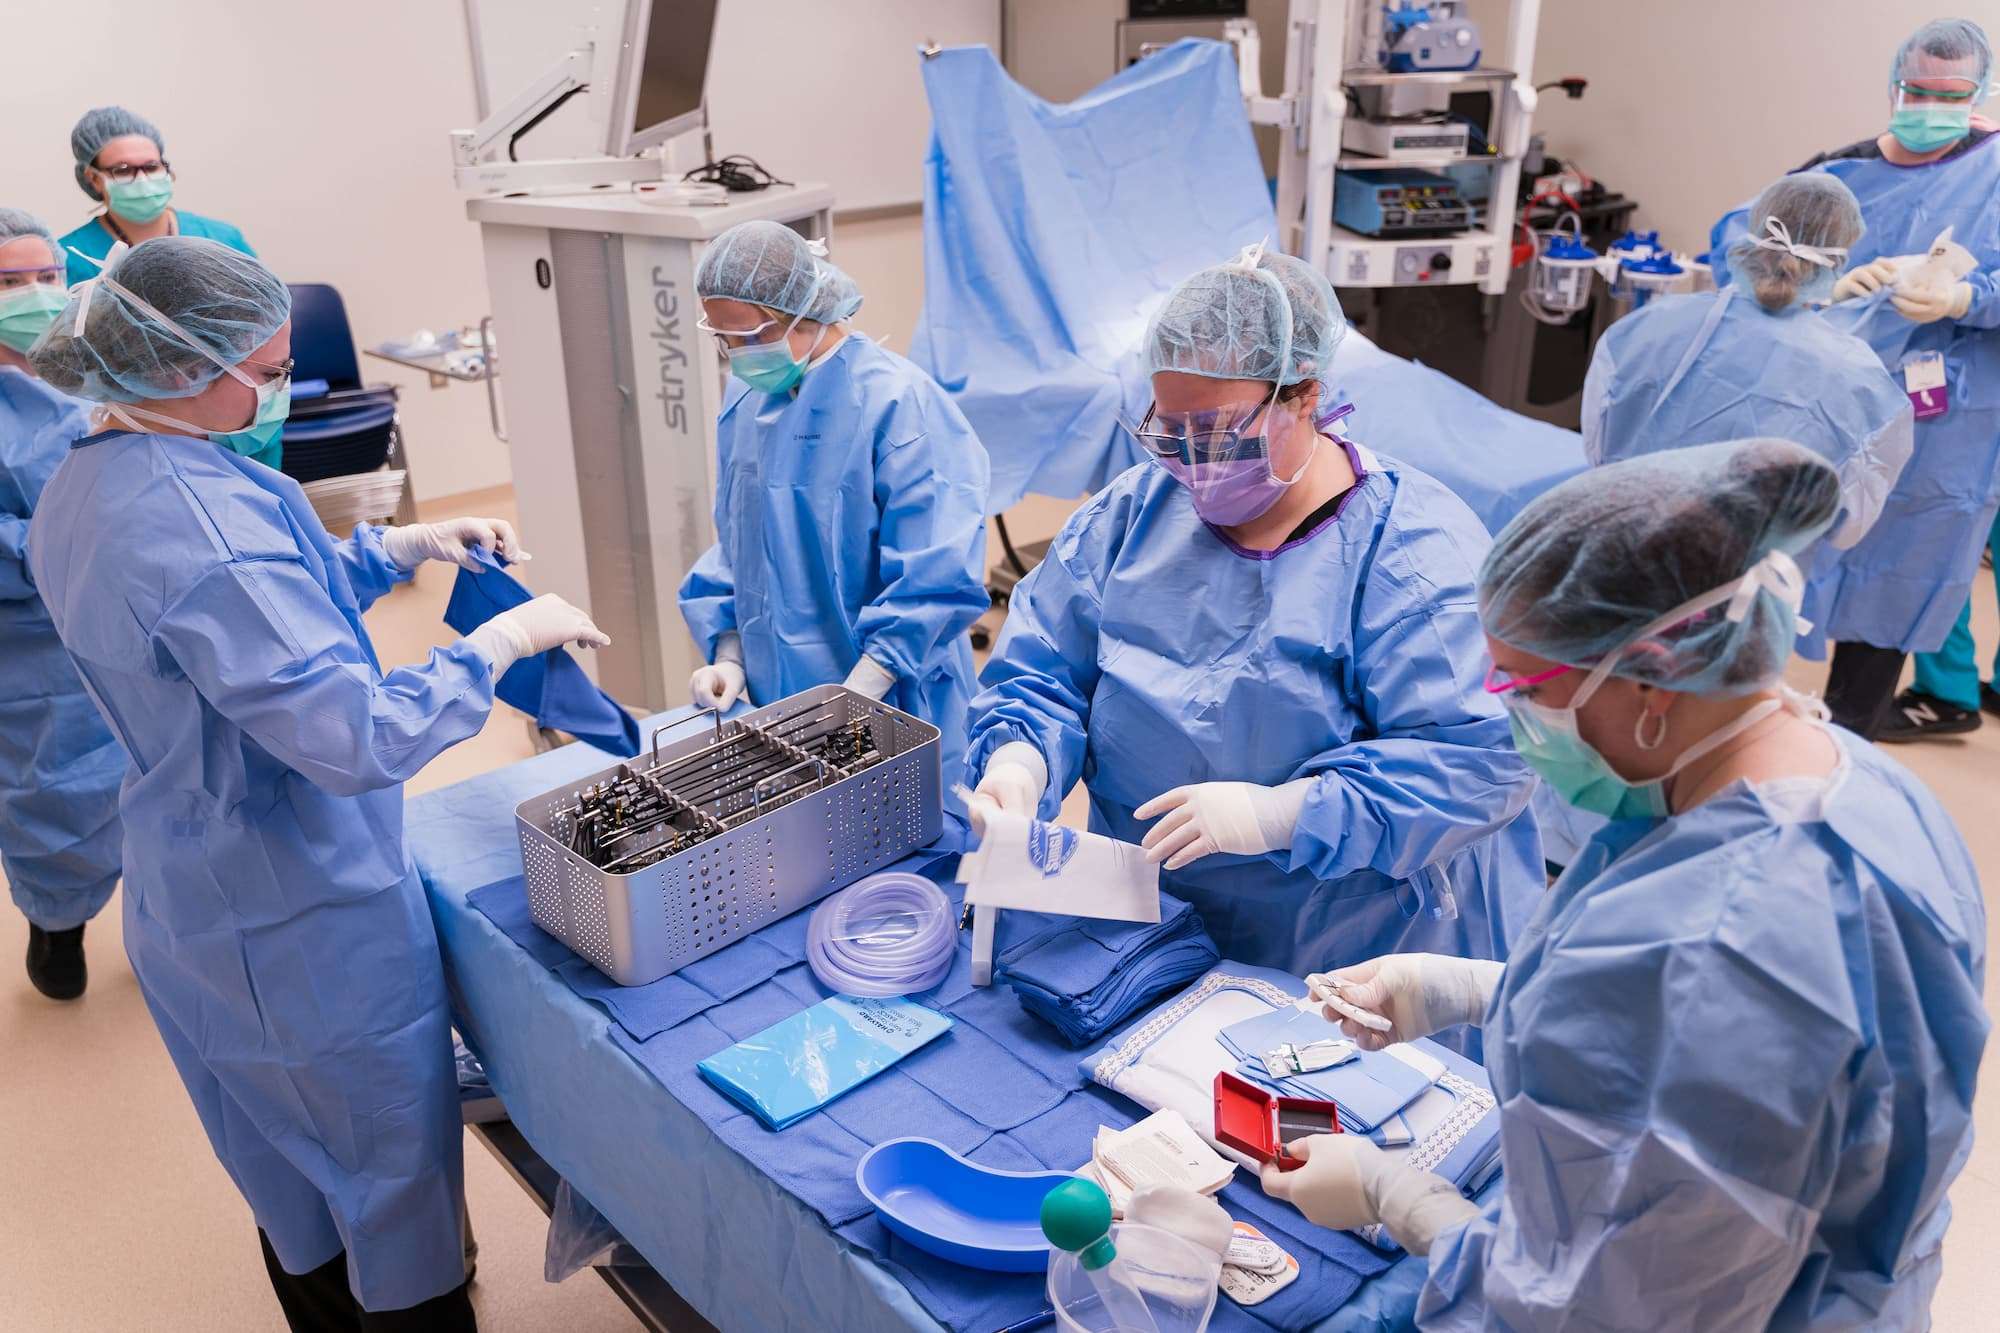 A full team of students prepare and organize surgical tools before a mock operation.